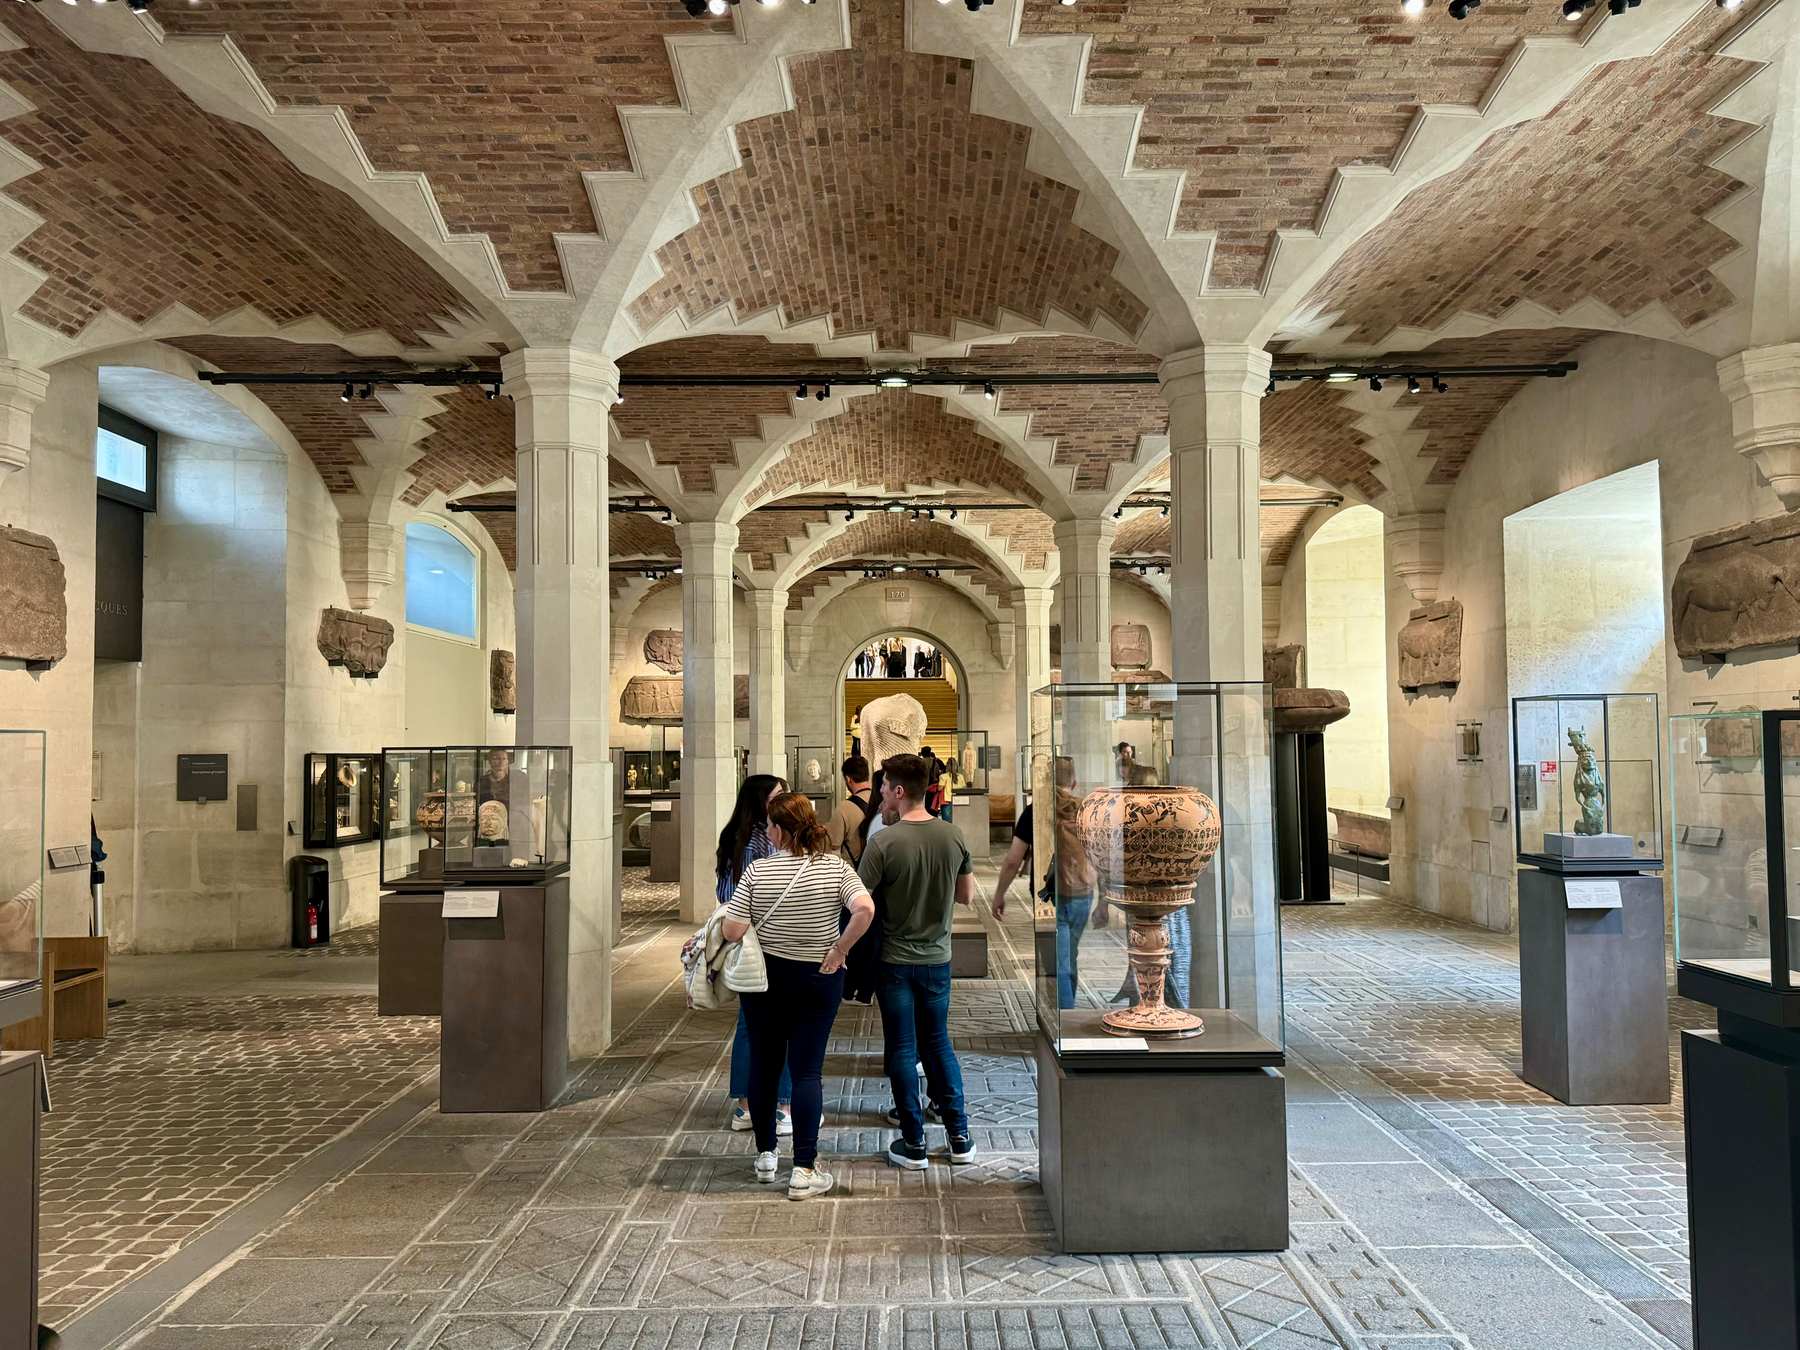 A spacious museum hall with vaulted ceilings, brickwork arches, historical artifacts displayed in glass cases, and visitors observing the exhibits.